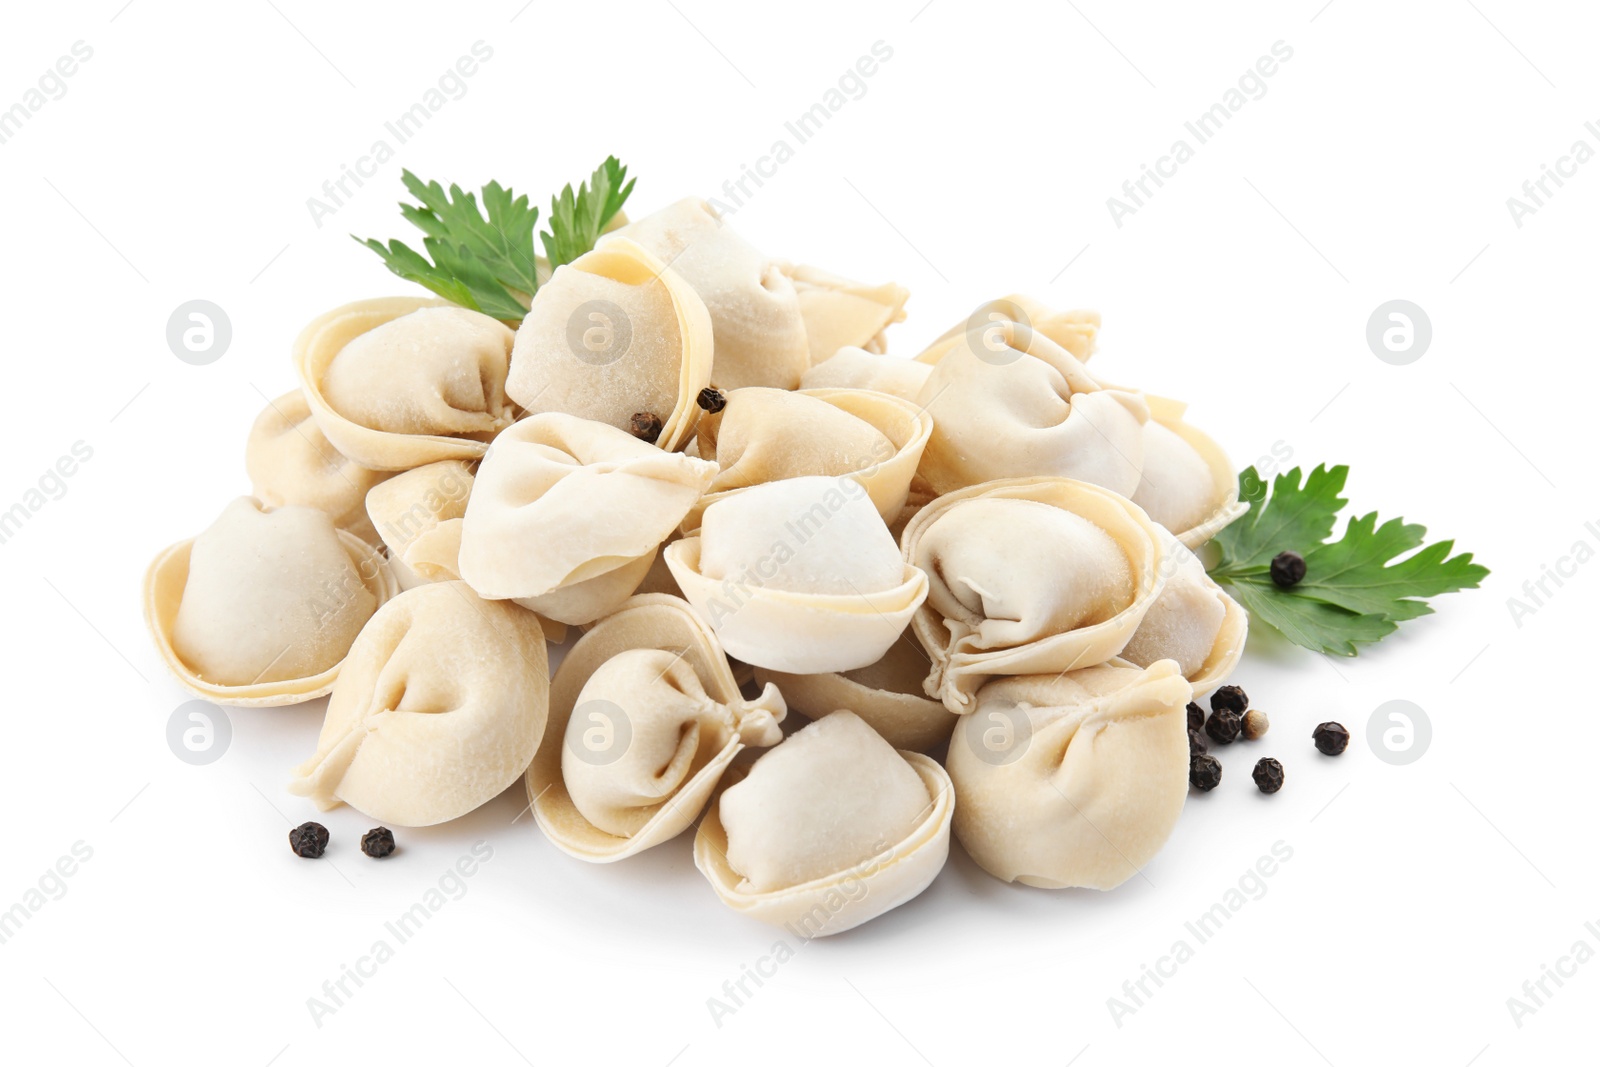 Photo of Raw dumplings on white background. Home cooking